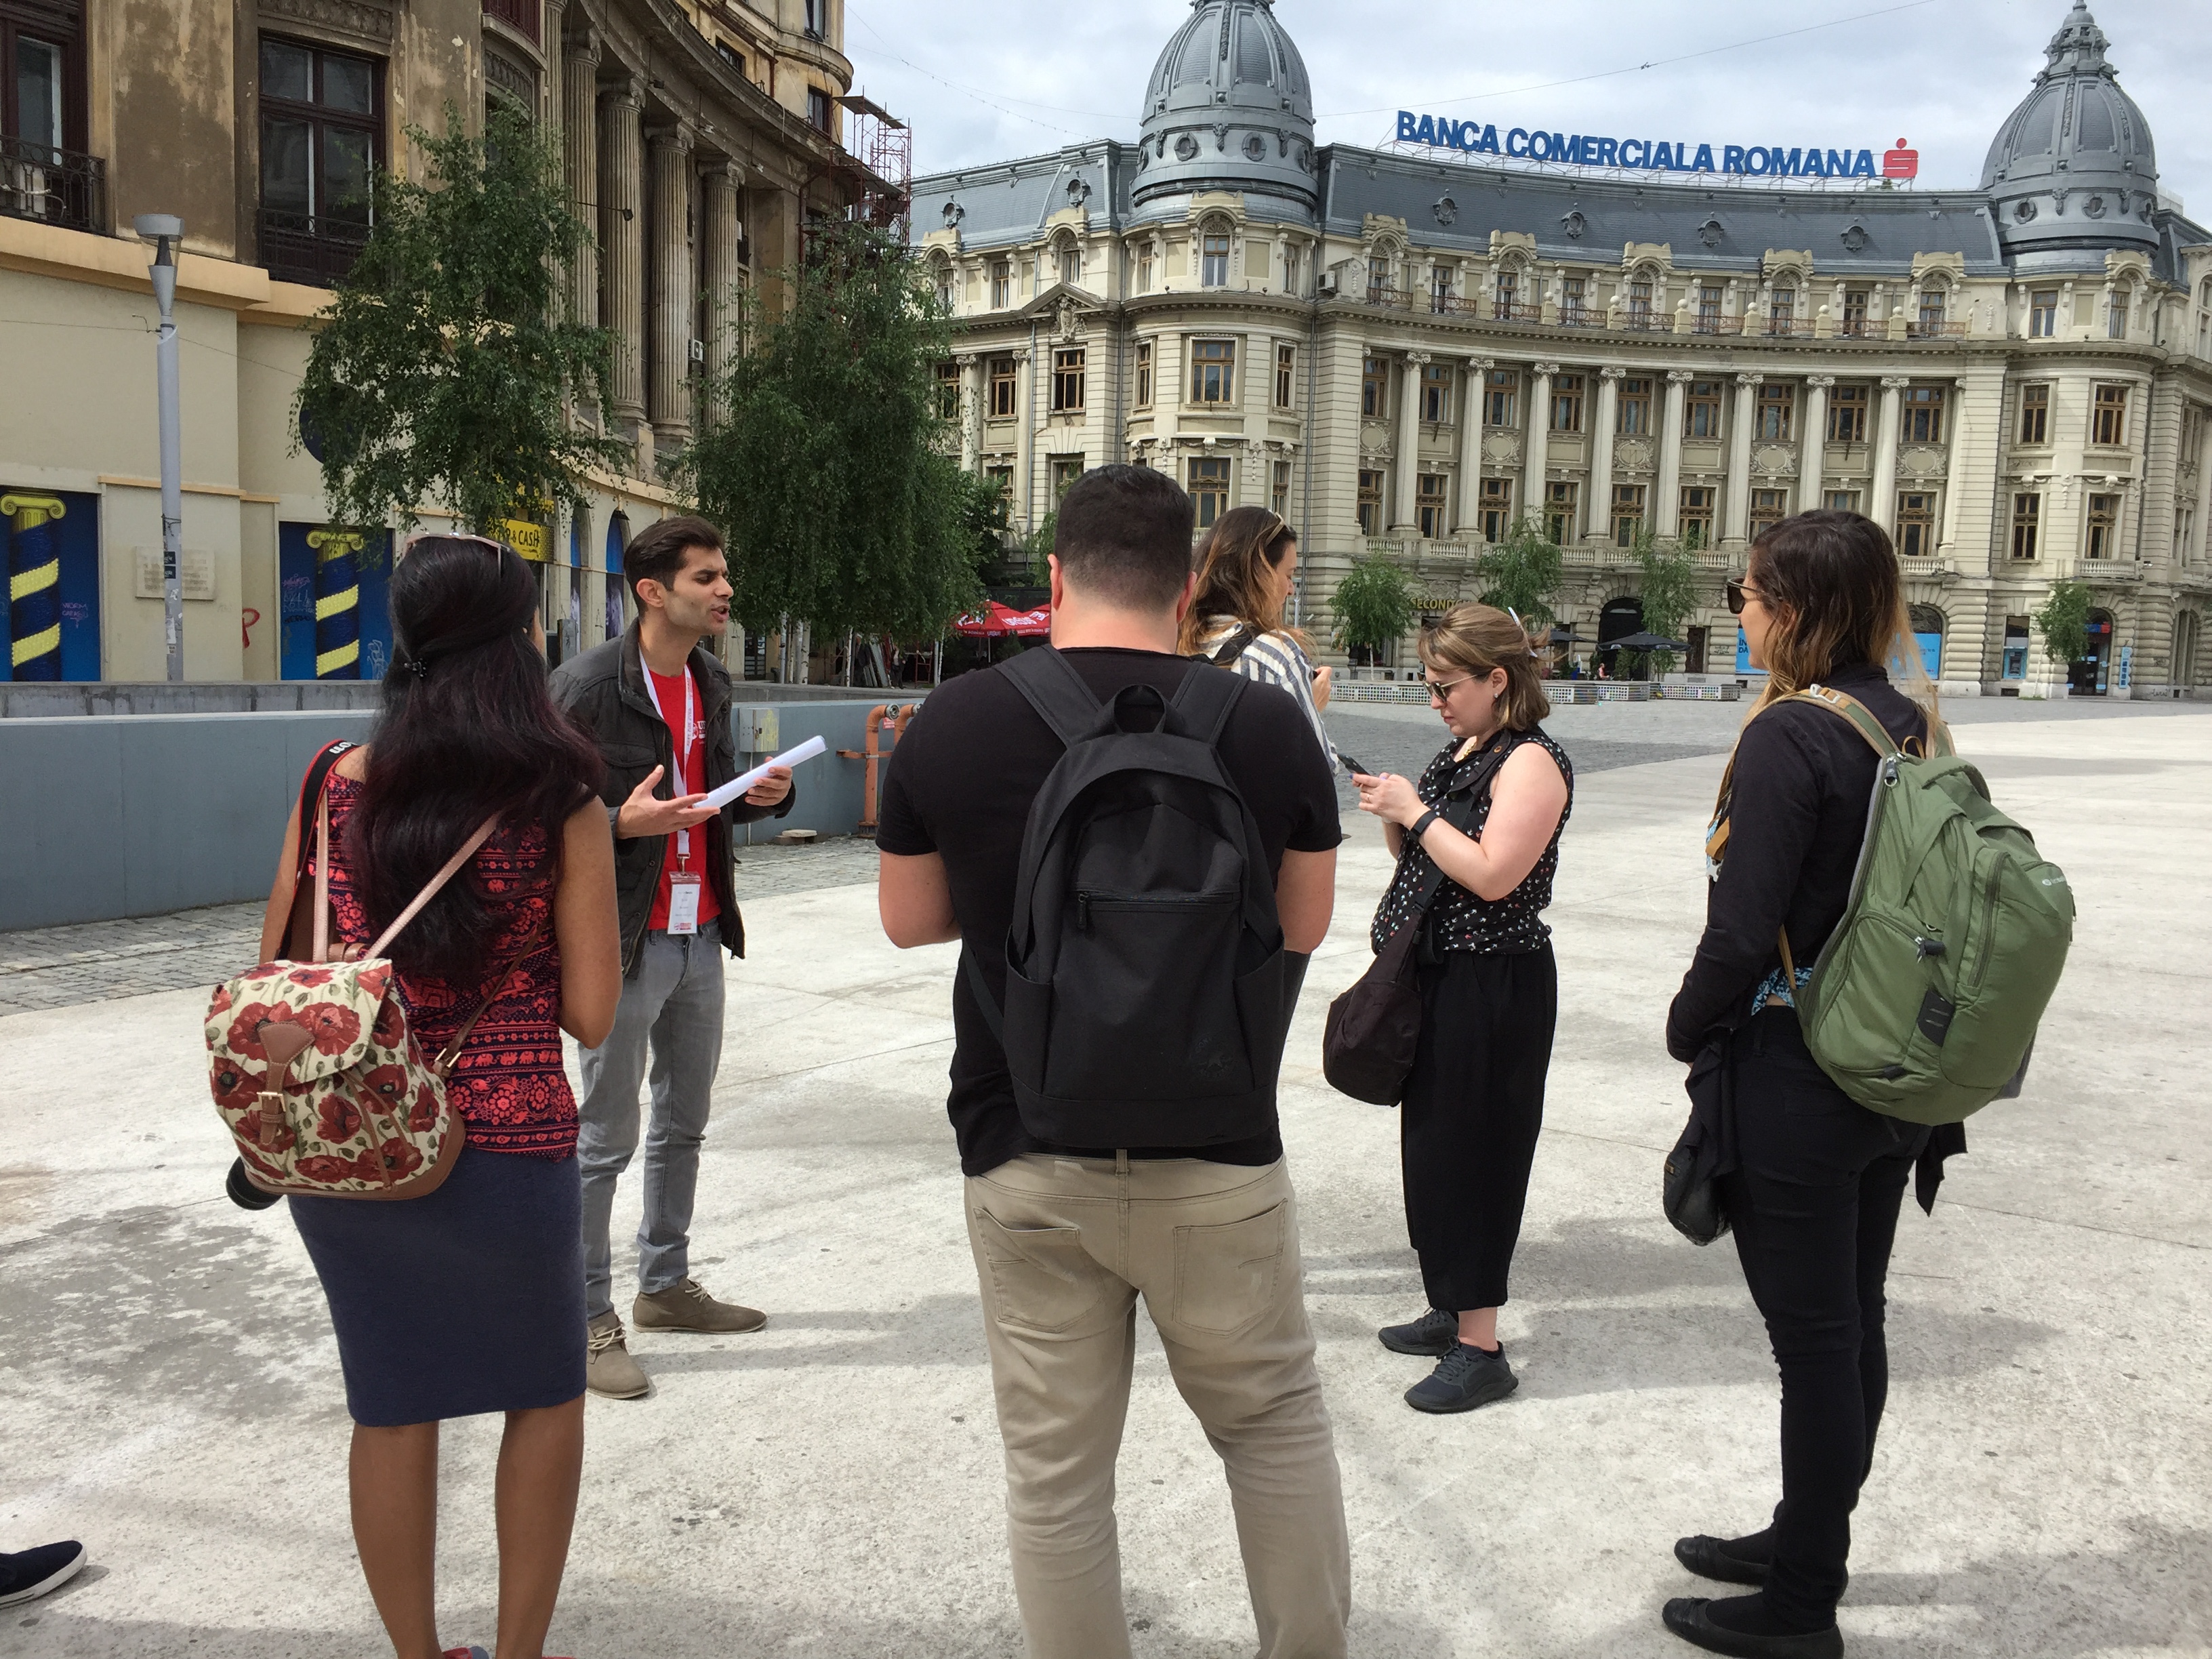 Explore Bucharest through the eyes of those who know it best, the homeless who live there. Urban Adventures offers the Outcast Tour lead by former homeless for a deeper look at Bucharest